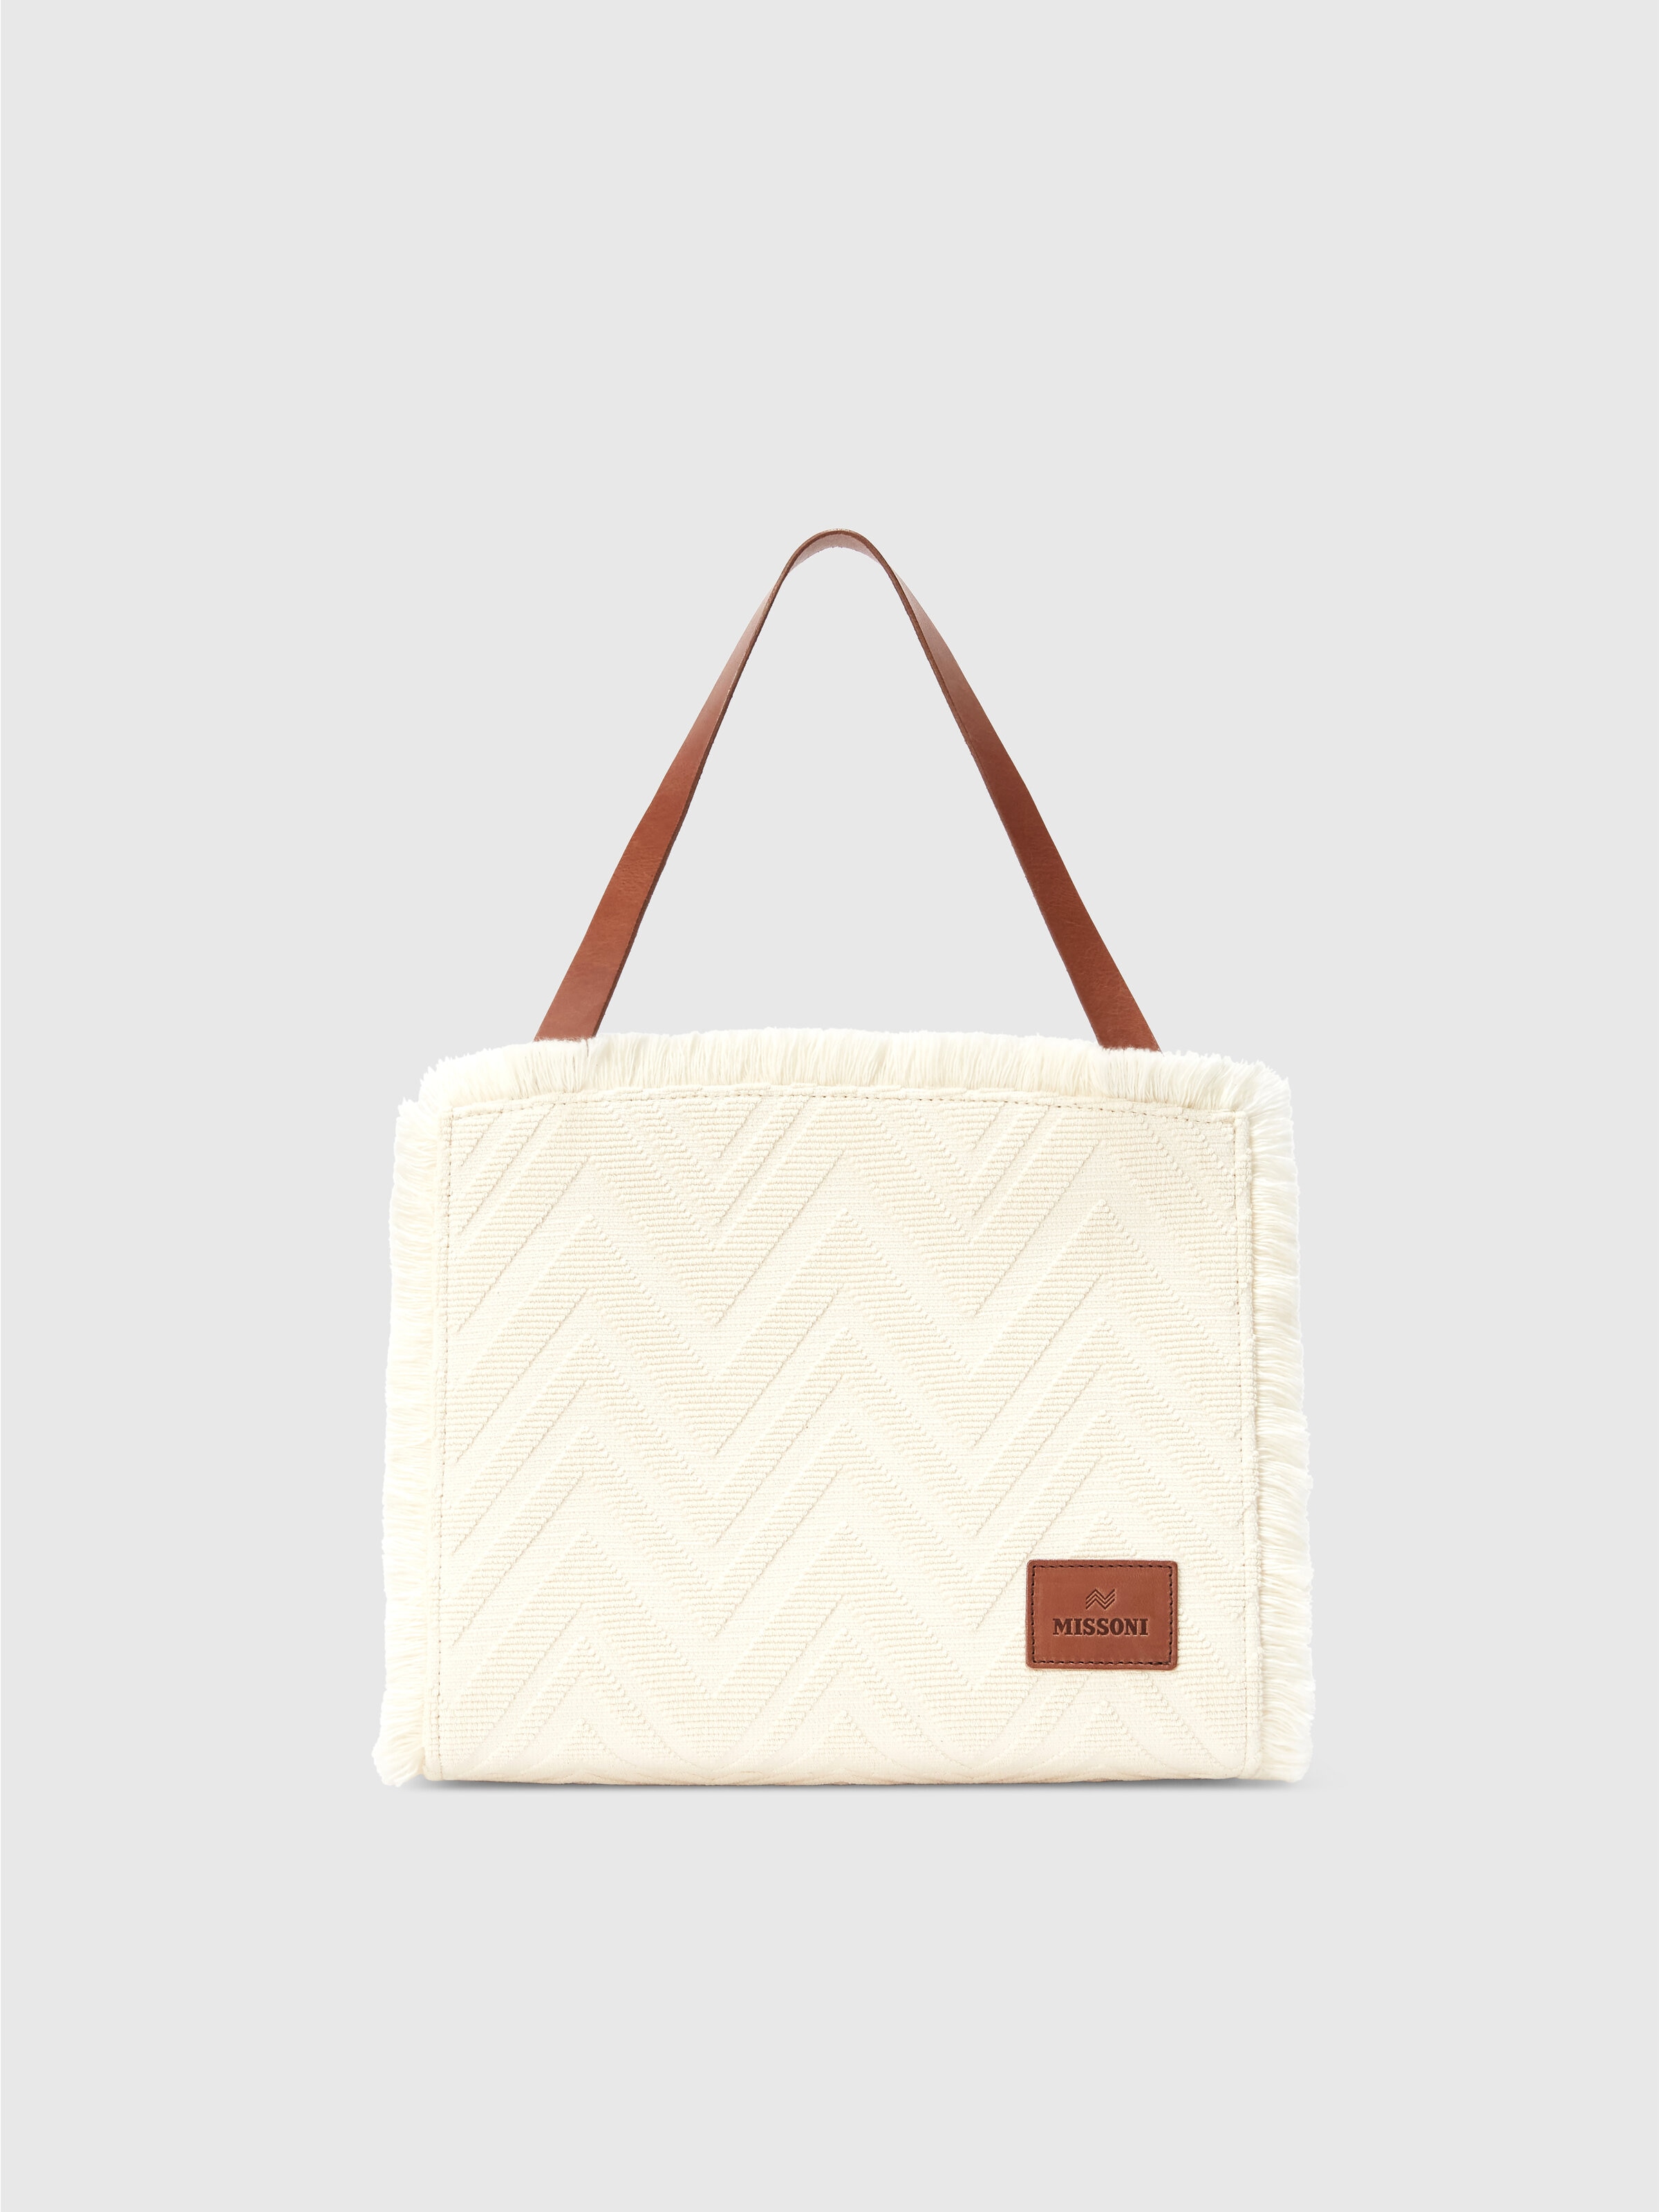 Tote bag in cotton blend with chevron pattern, Brown - 0